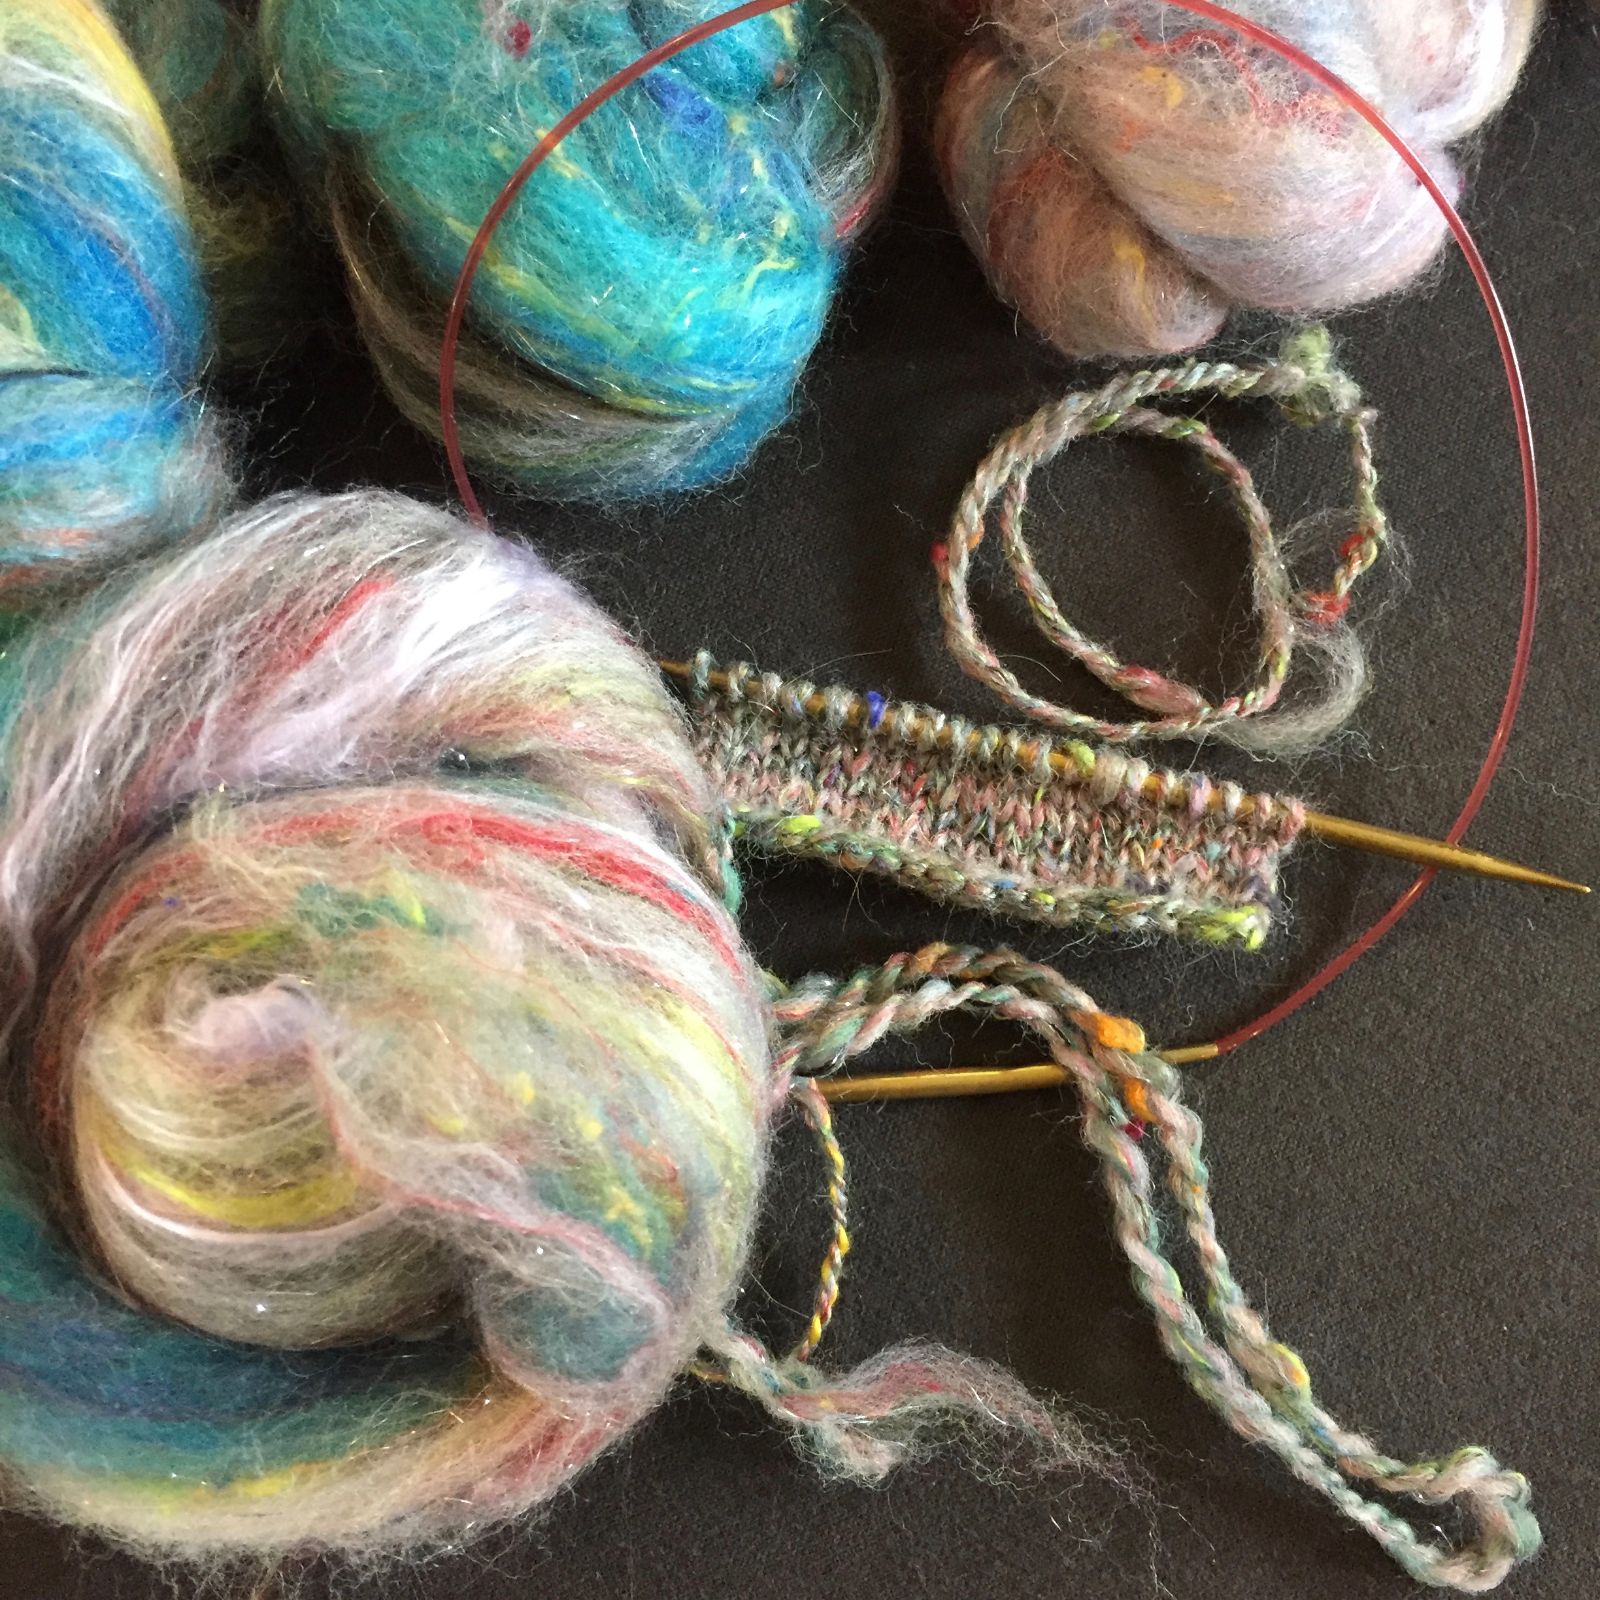 Balls of multicolored yarn with a piece of knitting on circular knitting needles